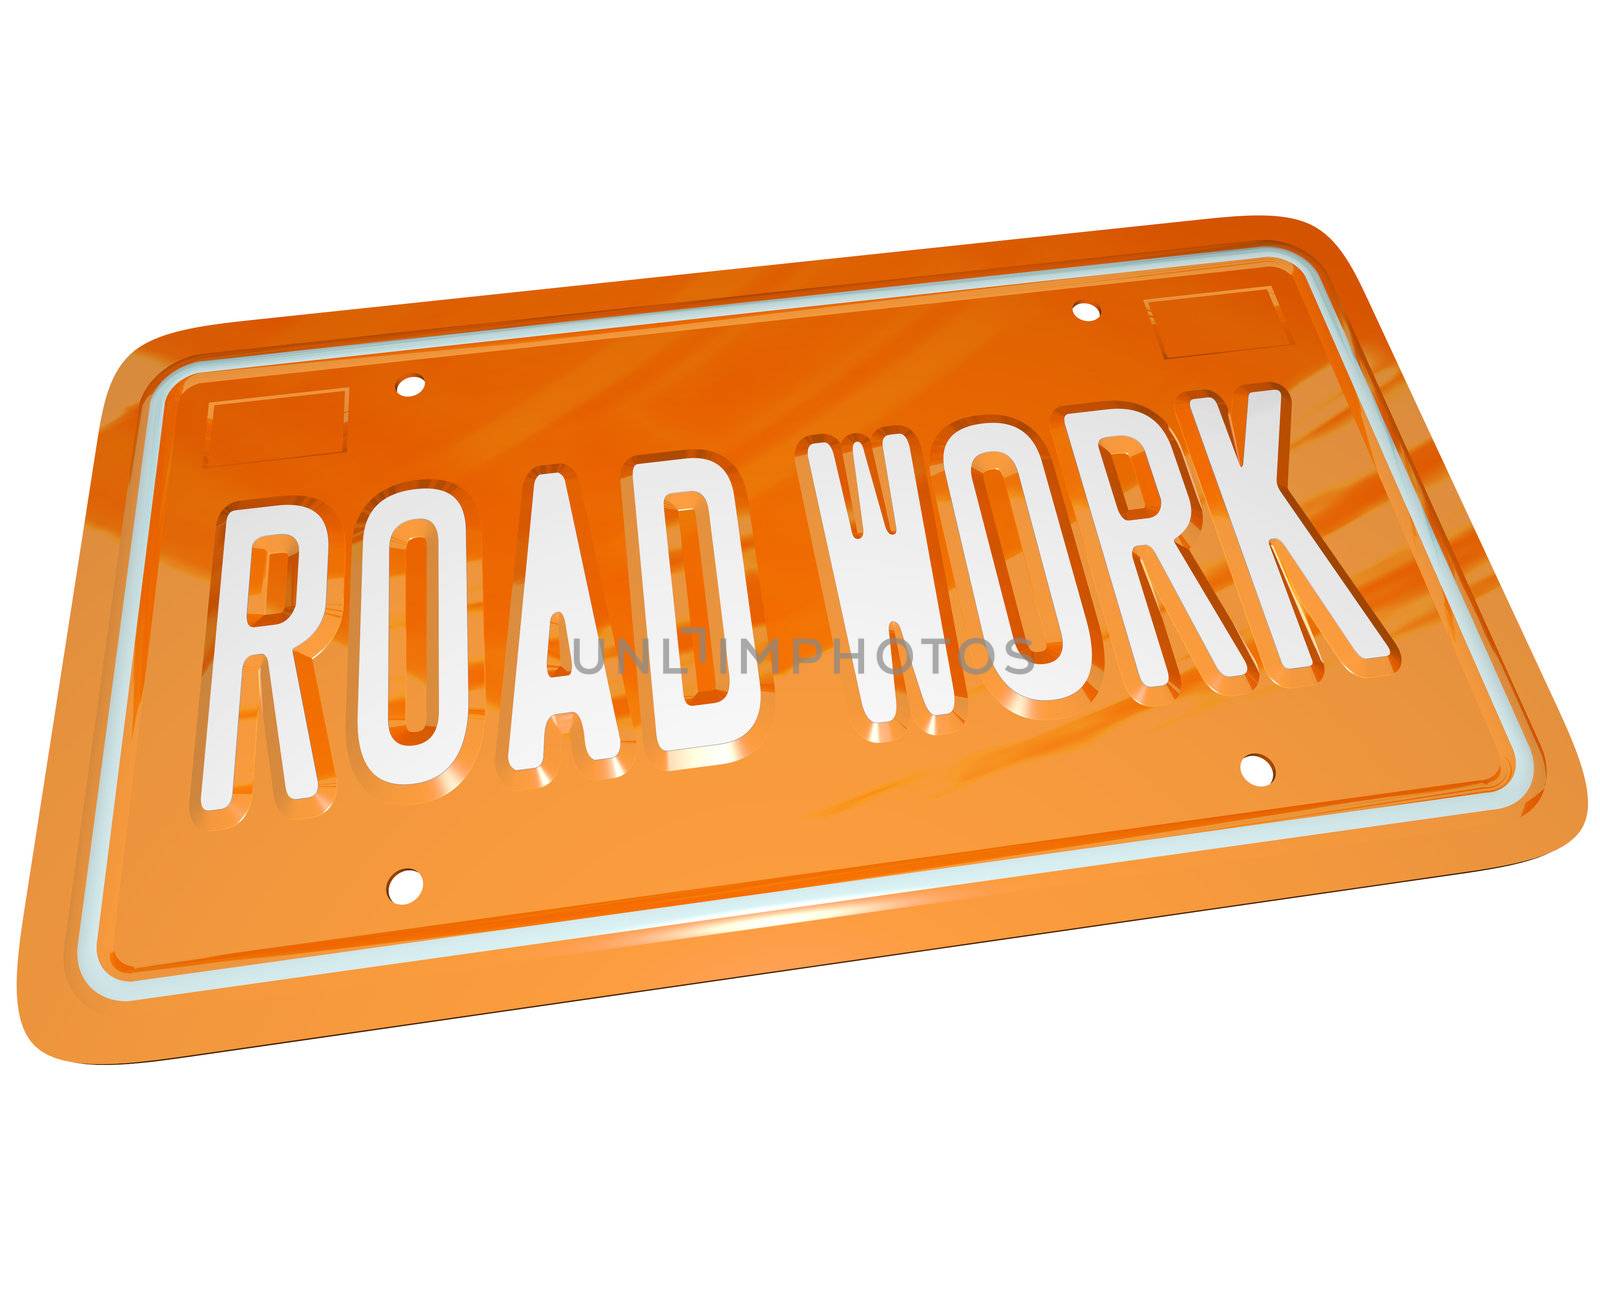 An orange metal license plate with the words Road Work communicating that there is roadwork ahead and construction is creating detours and traffic congestion